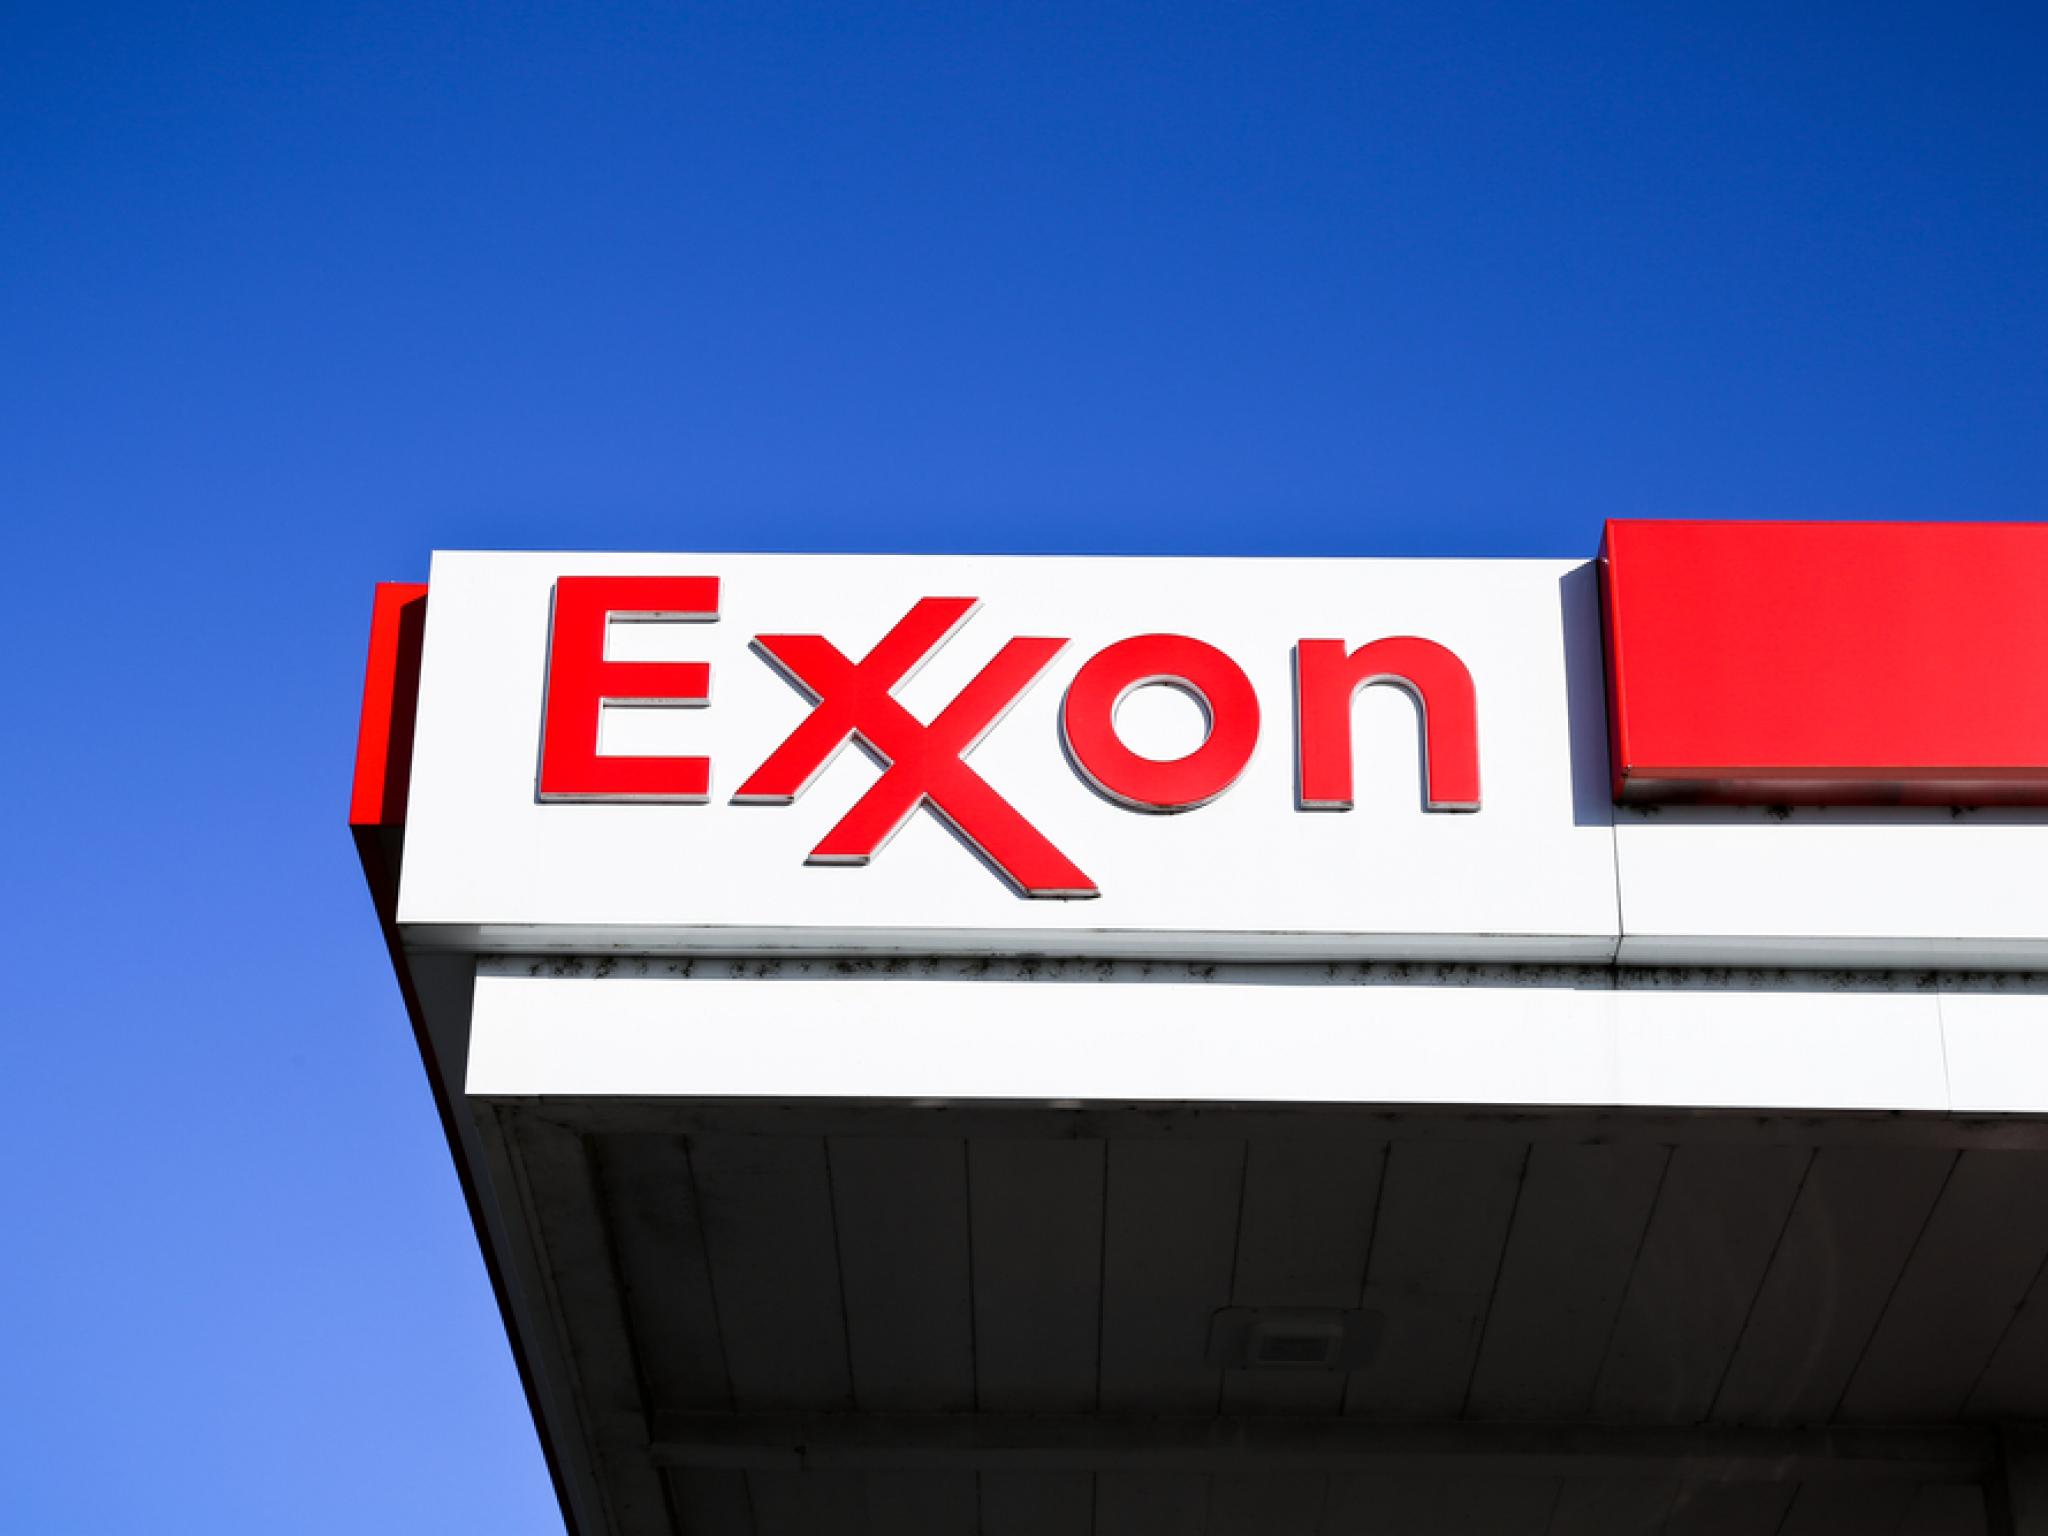  exxon-mobils-stock-slides-oil-up-gas-down-makes-for-mixed-q2-earnings-outlook 